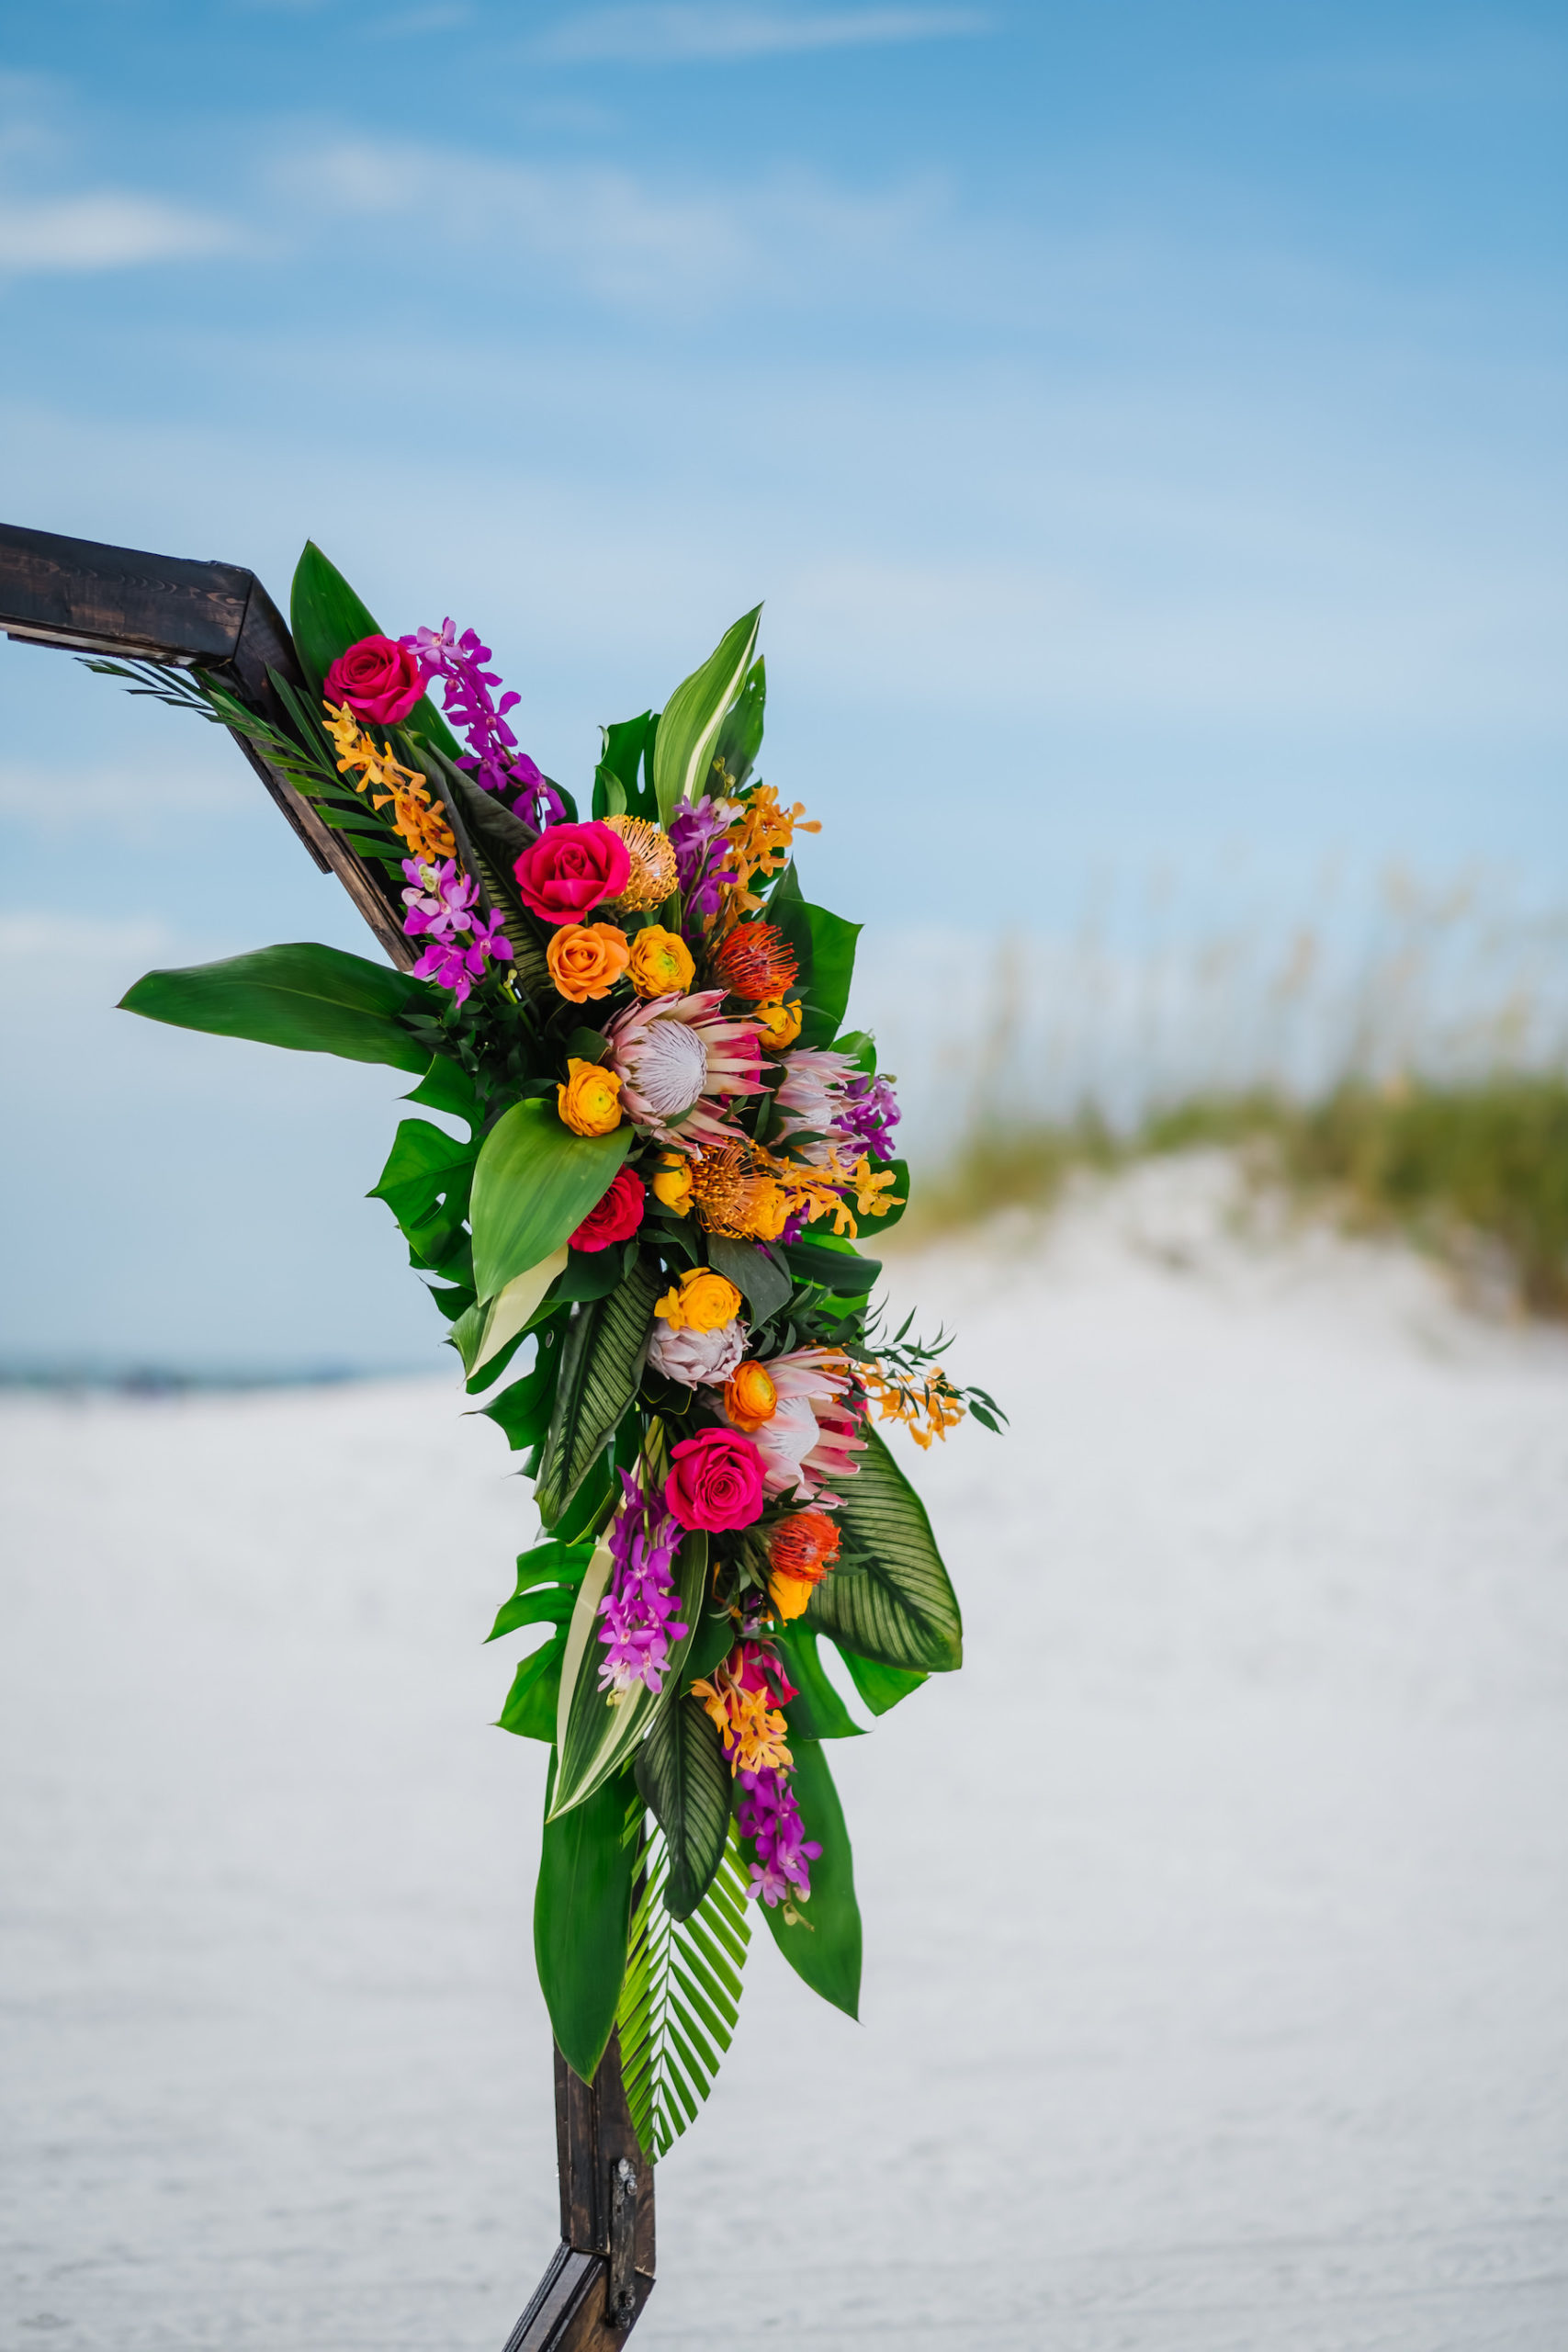 Clearwater Beach Waterfront Beachfront Wedding Reception Decor, Tropical Floral Arrangements, King Proteas, Palm Fronds, Monstera Palm Leaves, Orange, Pink, Purple and Yellow Floral Arrangements on Geometric Octagonal Ceremony Arch | Florida Beach Wedding Ceremony Decor Ideas